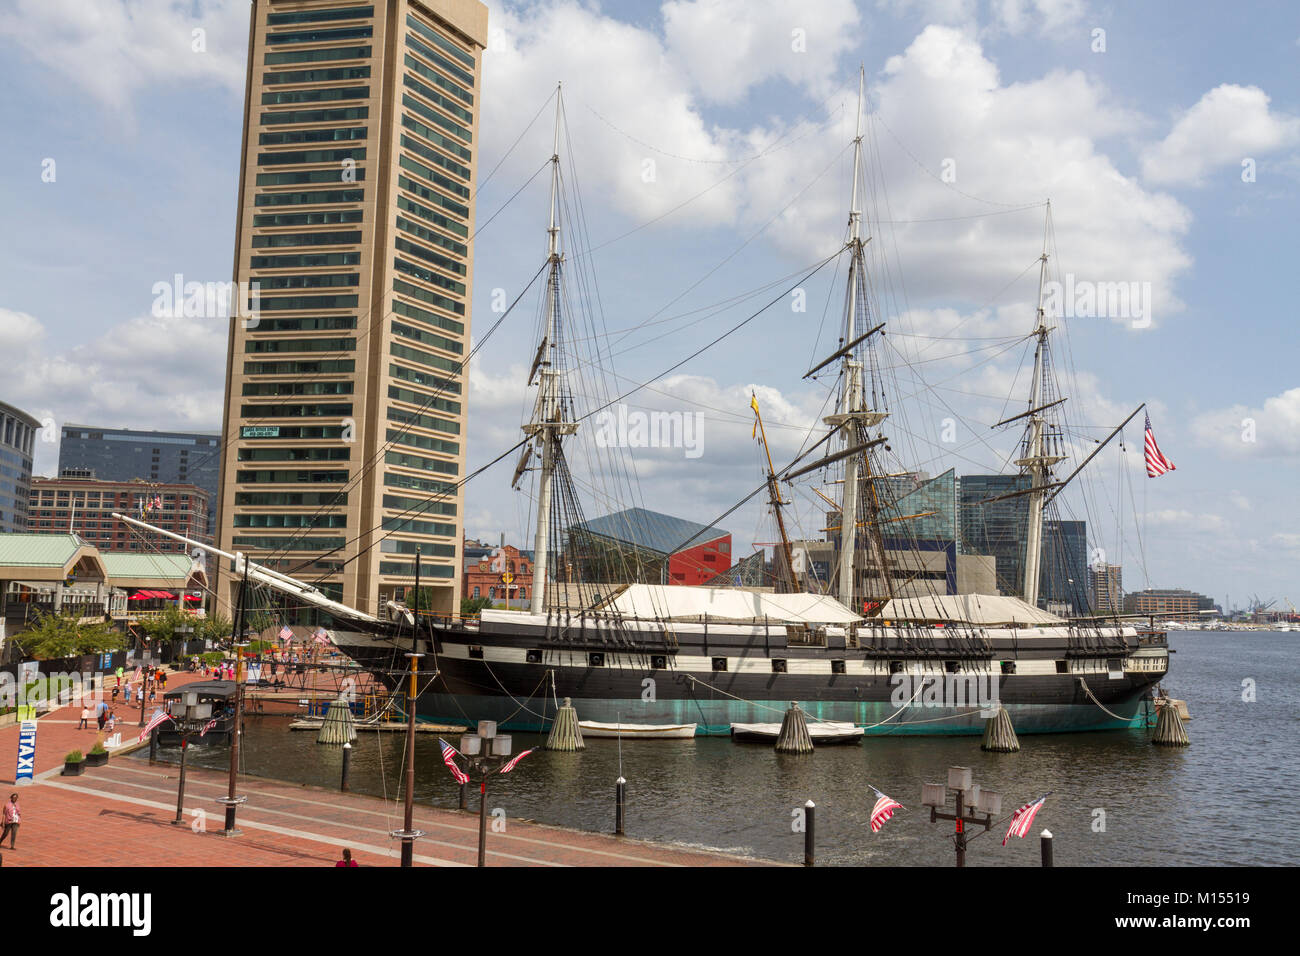 The USS Constellation, a sloop-of-war moored in Baltimore Inner Harbor, Maryland, United States. Stock Photo